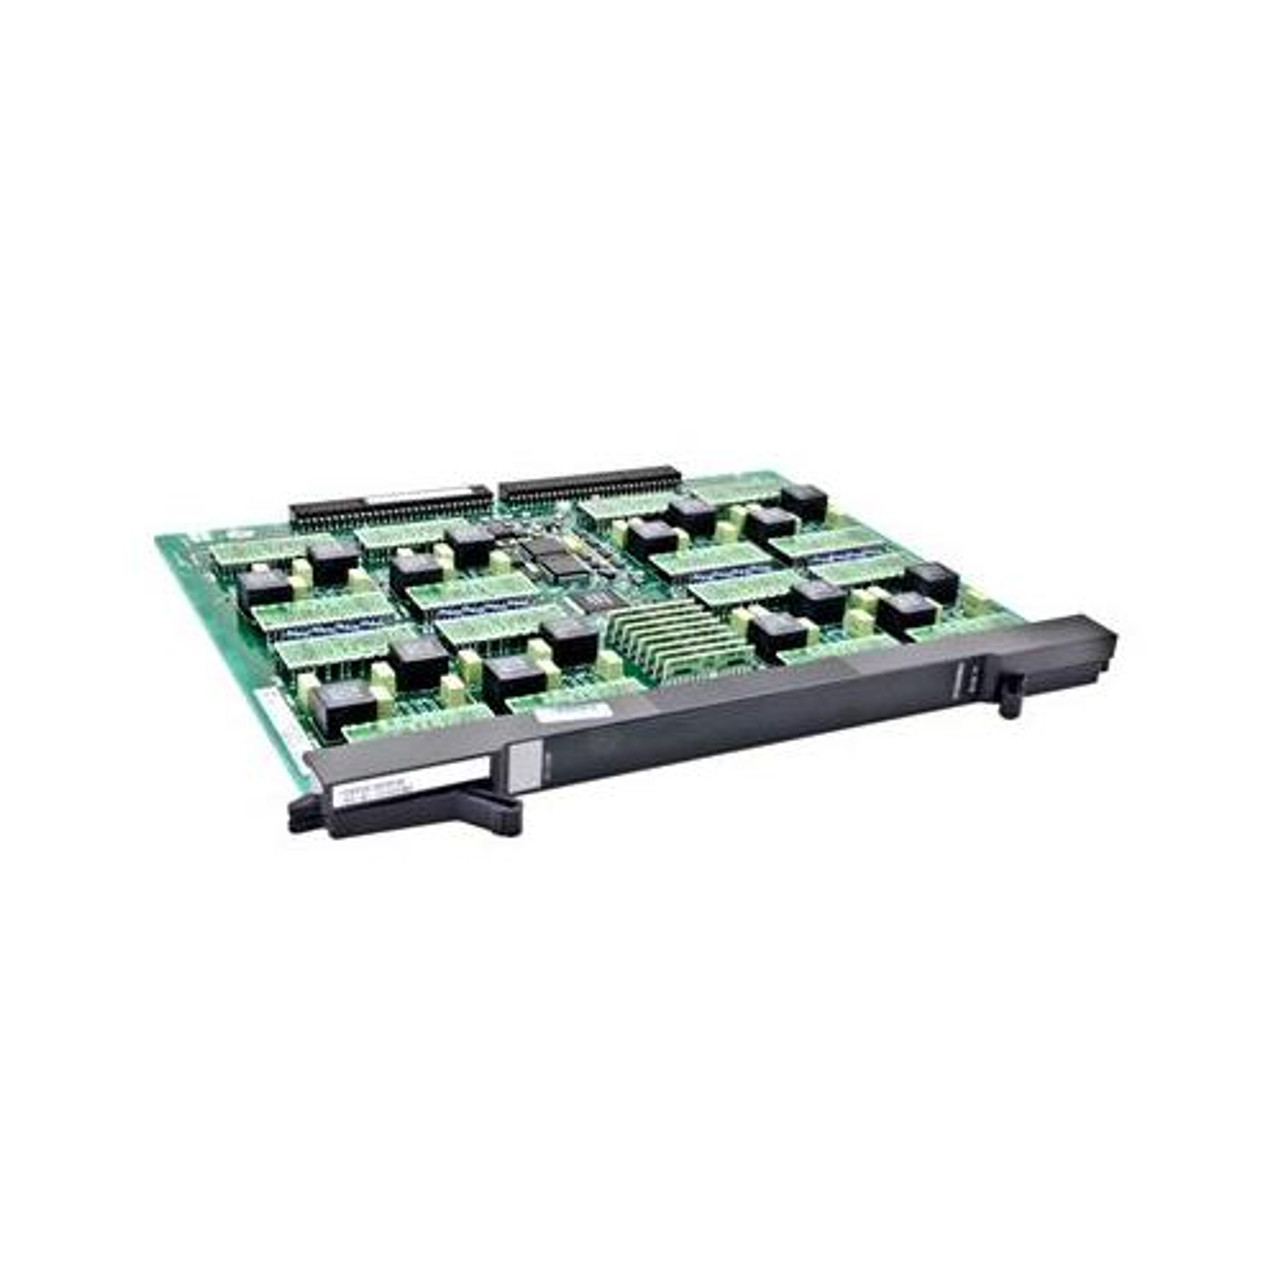 91-004-629001B ZyXEL Communications IES-1248-51A Hardened/ mini IP DSLAM/ 48-Port ADSL 2+ Annex A with built-in splitter